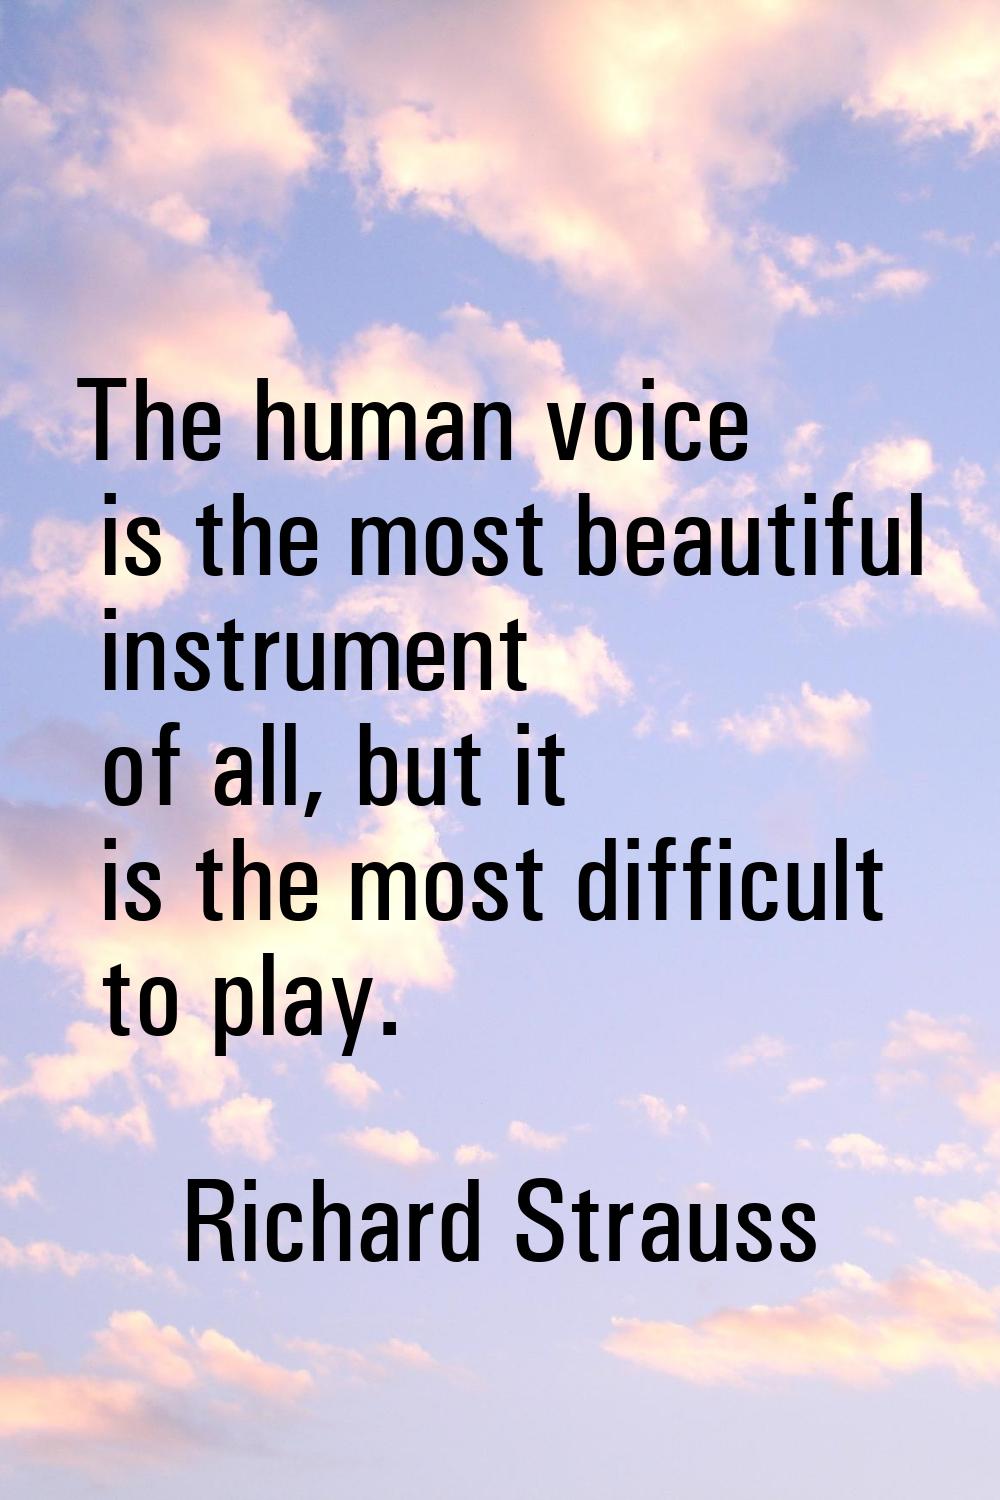 The human voice is the most beautiful instrument of all, but it is the most difficult to play.